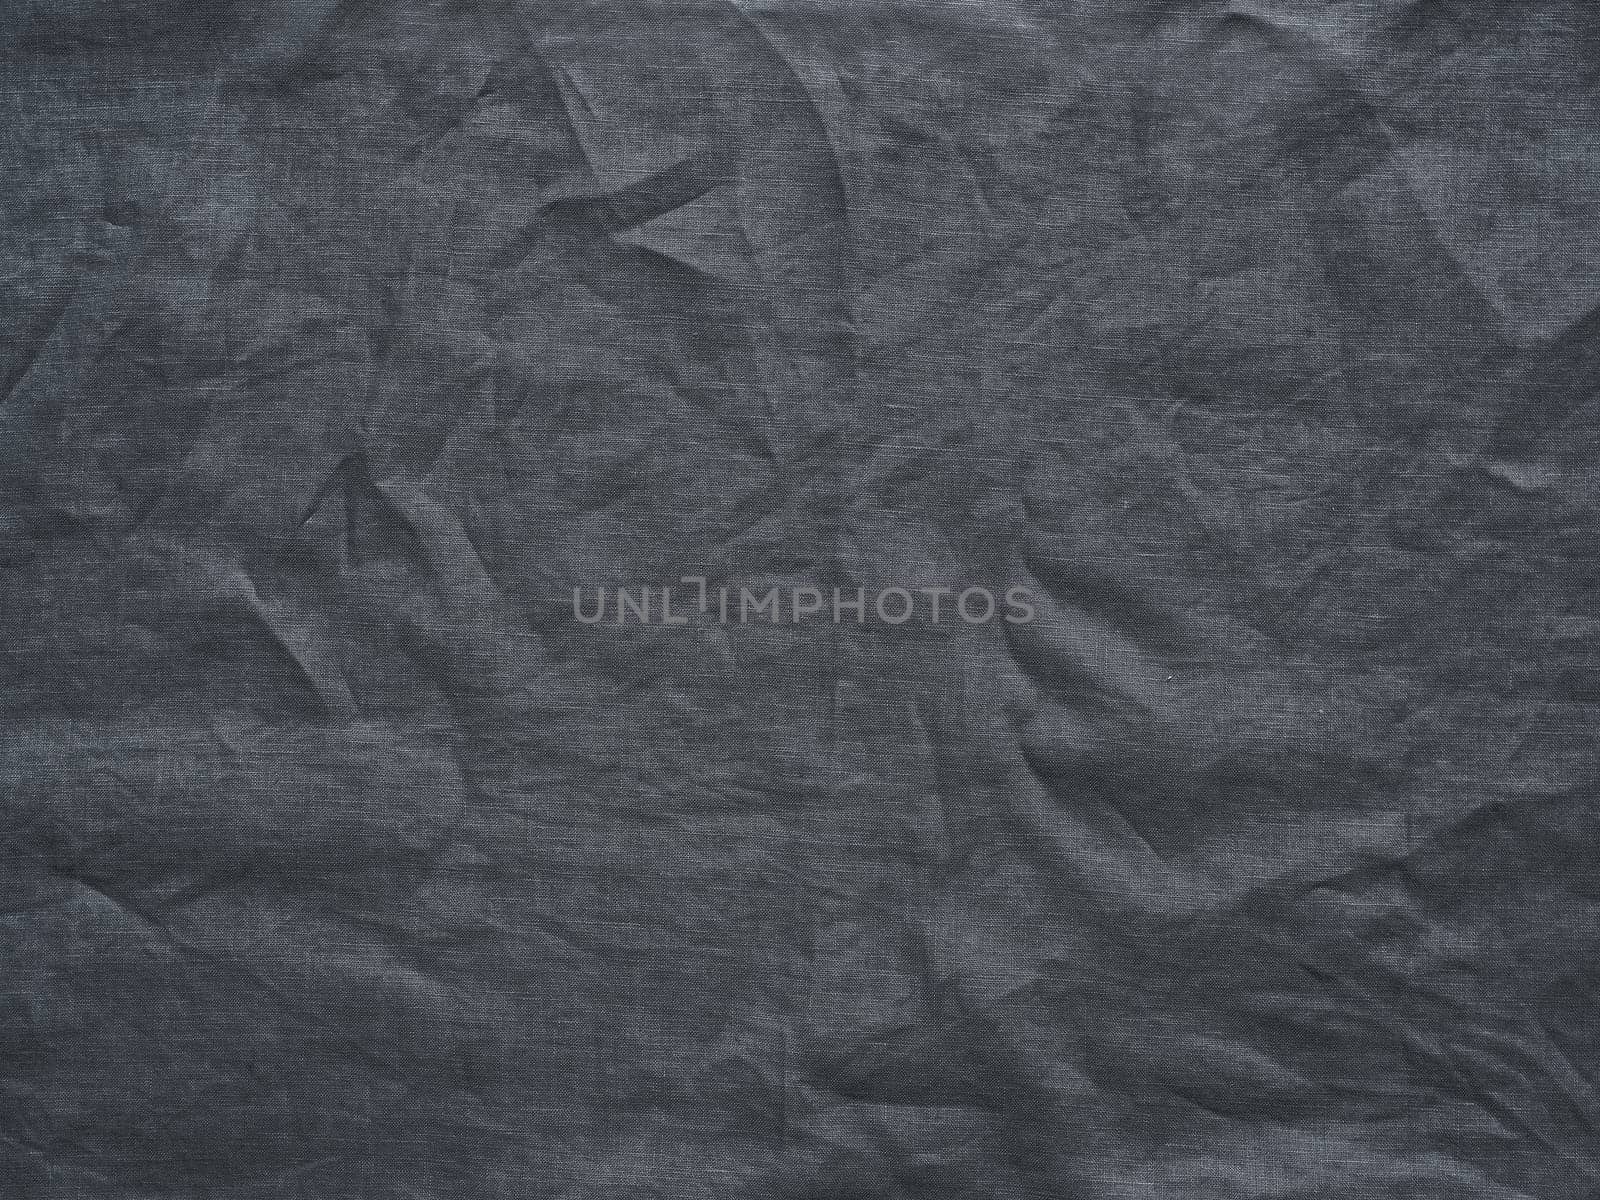 Gray linen texture as background. Gray linen crumpled tablecloth. Can use as mock up for design. Copy space for text